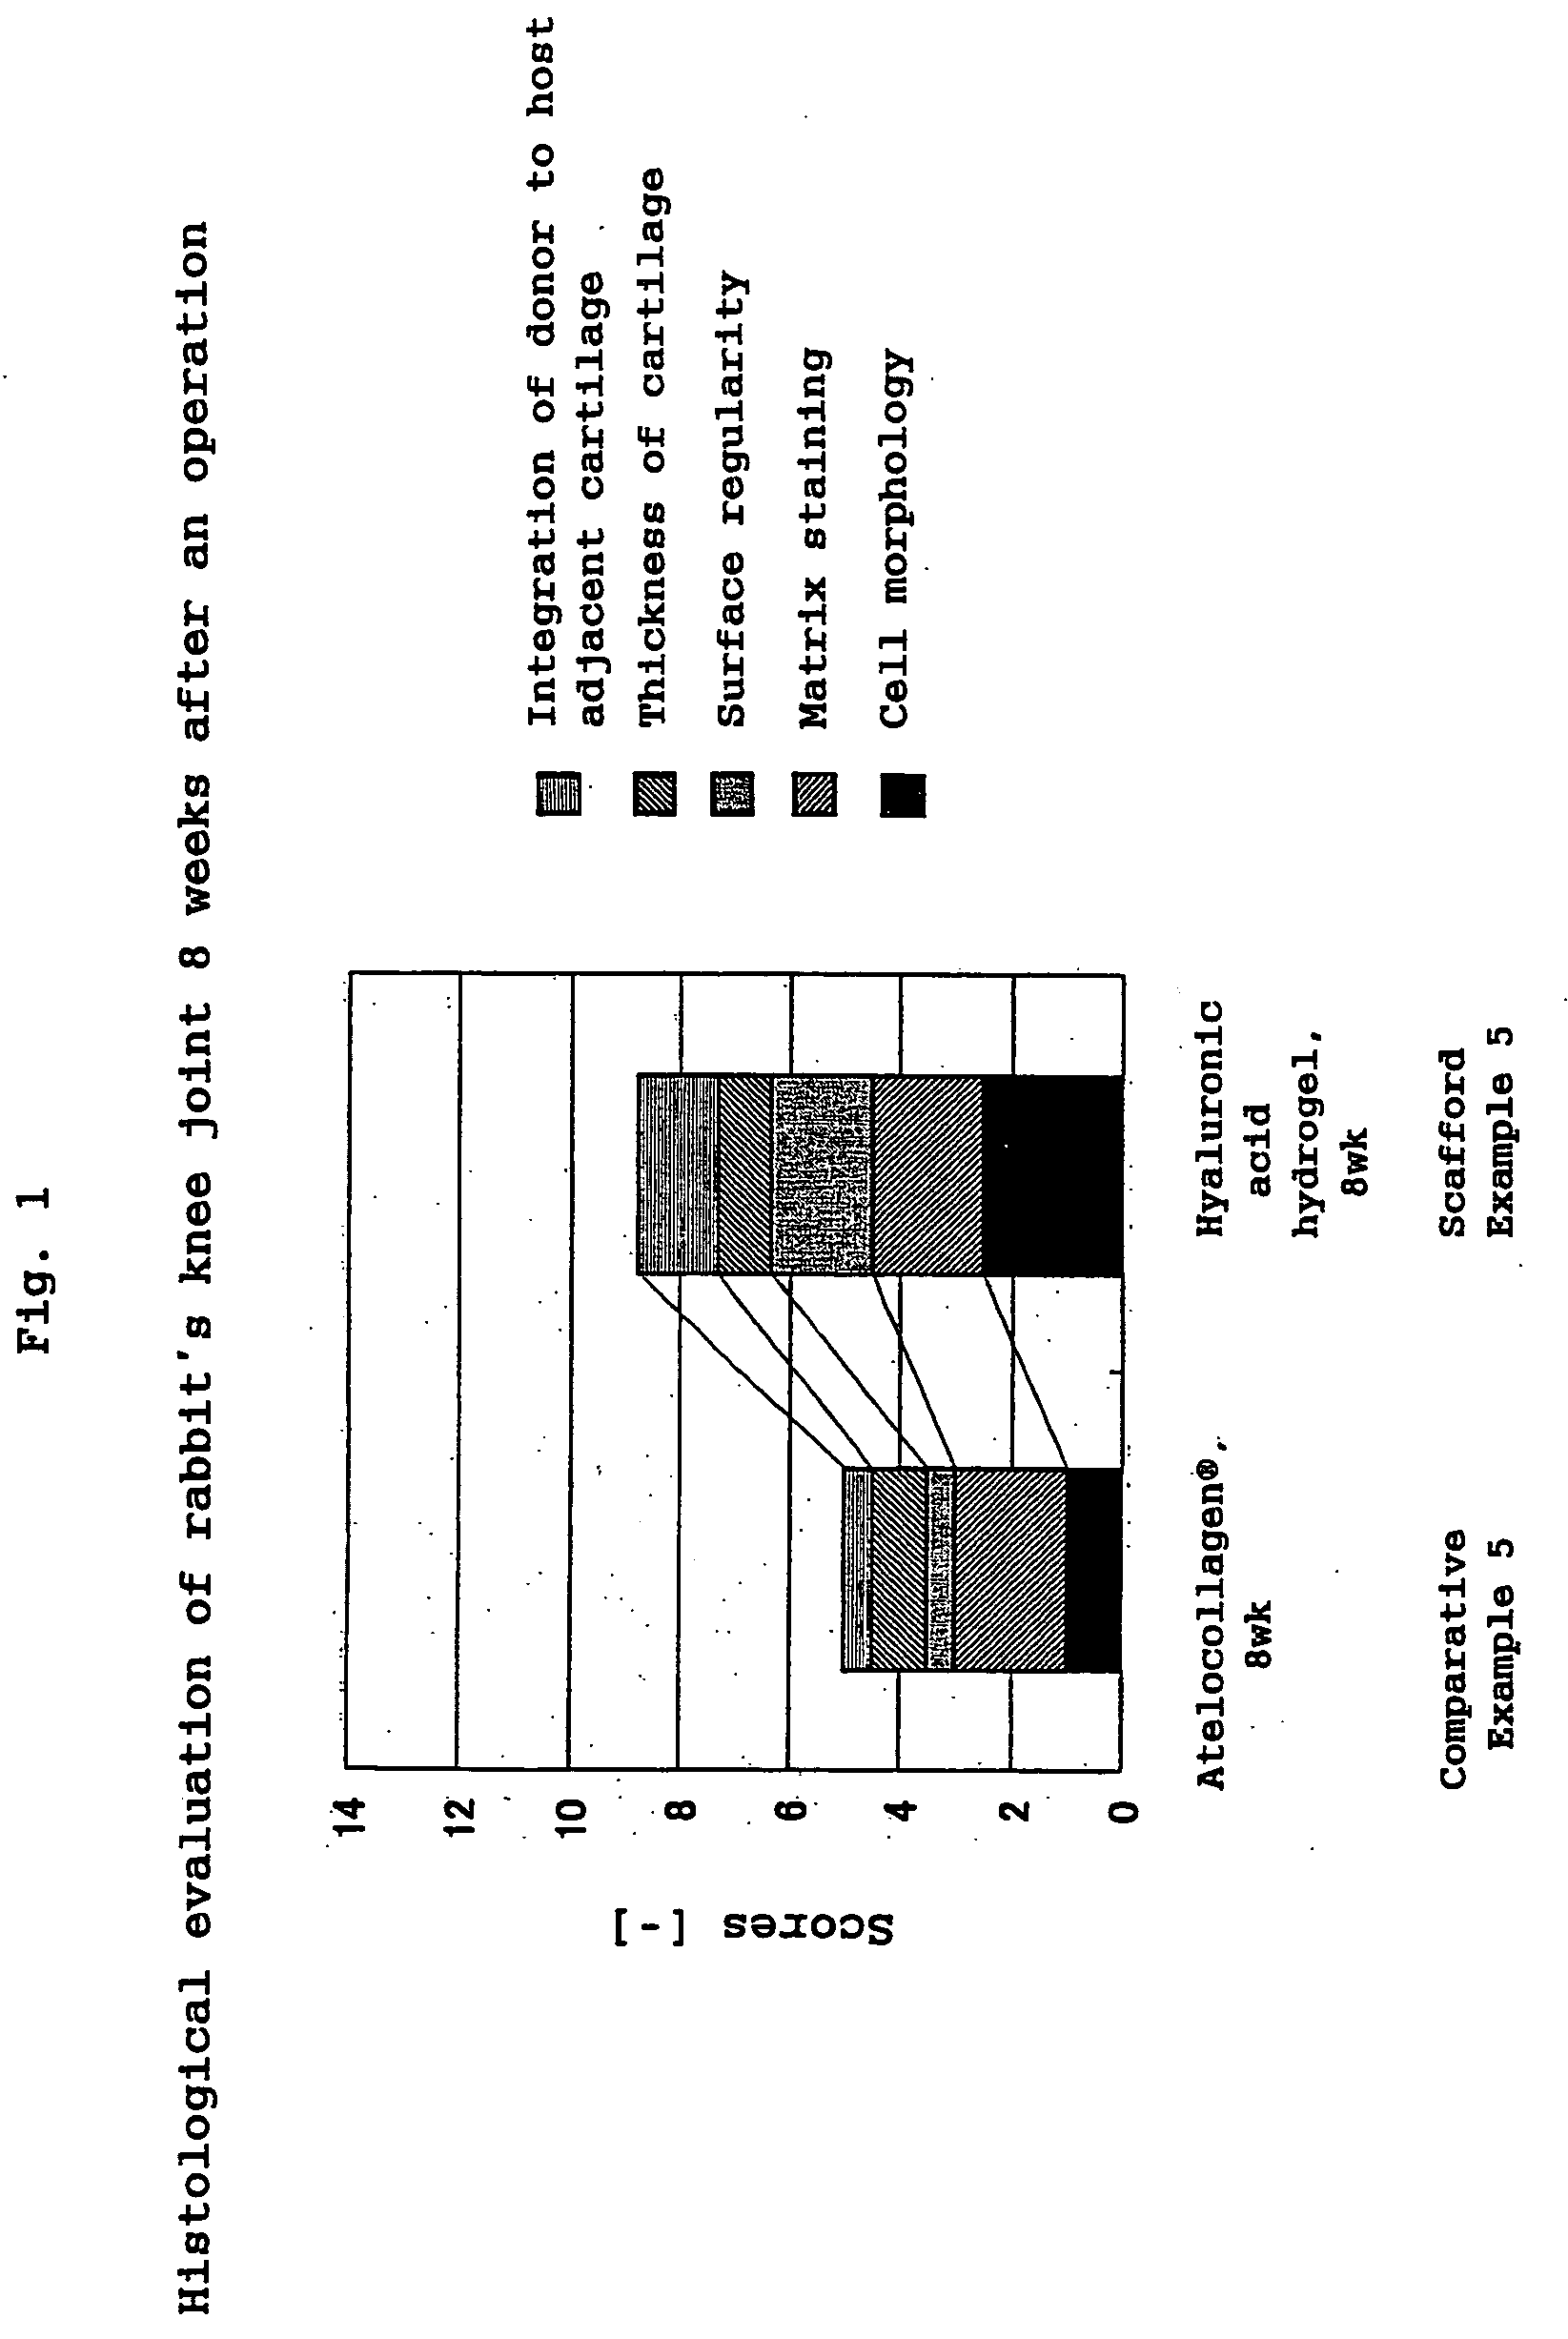 Hyaluronic Acid Compound, Hydrogel Thereof and Joint Treating Material